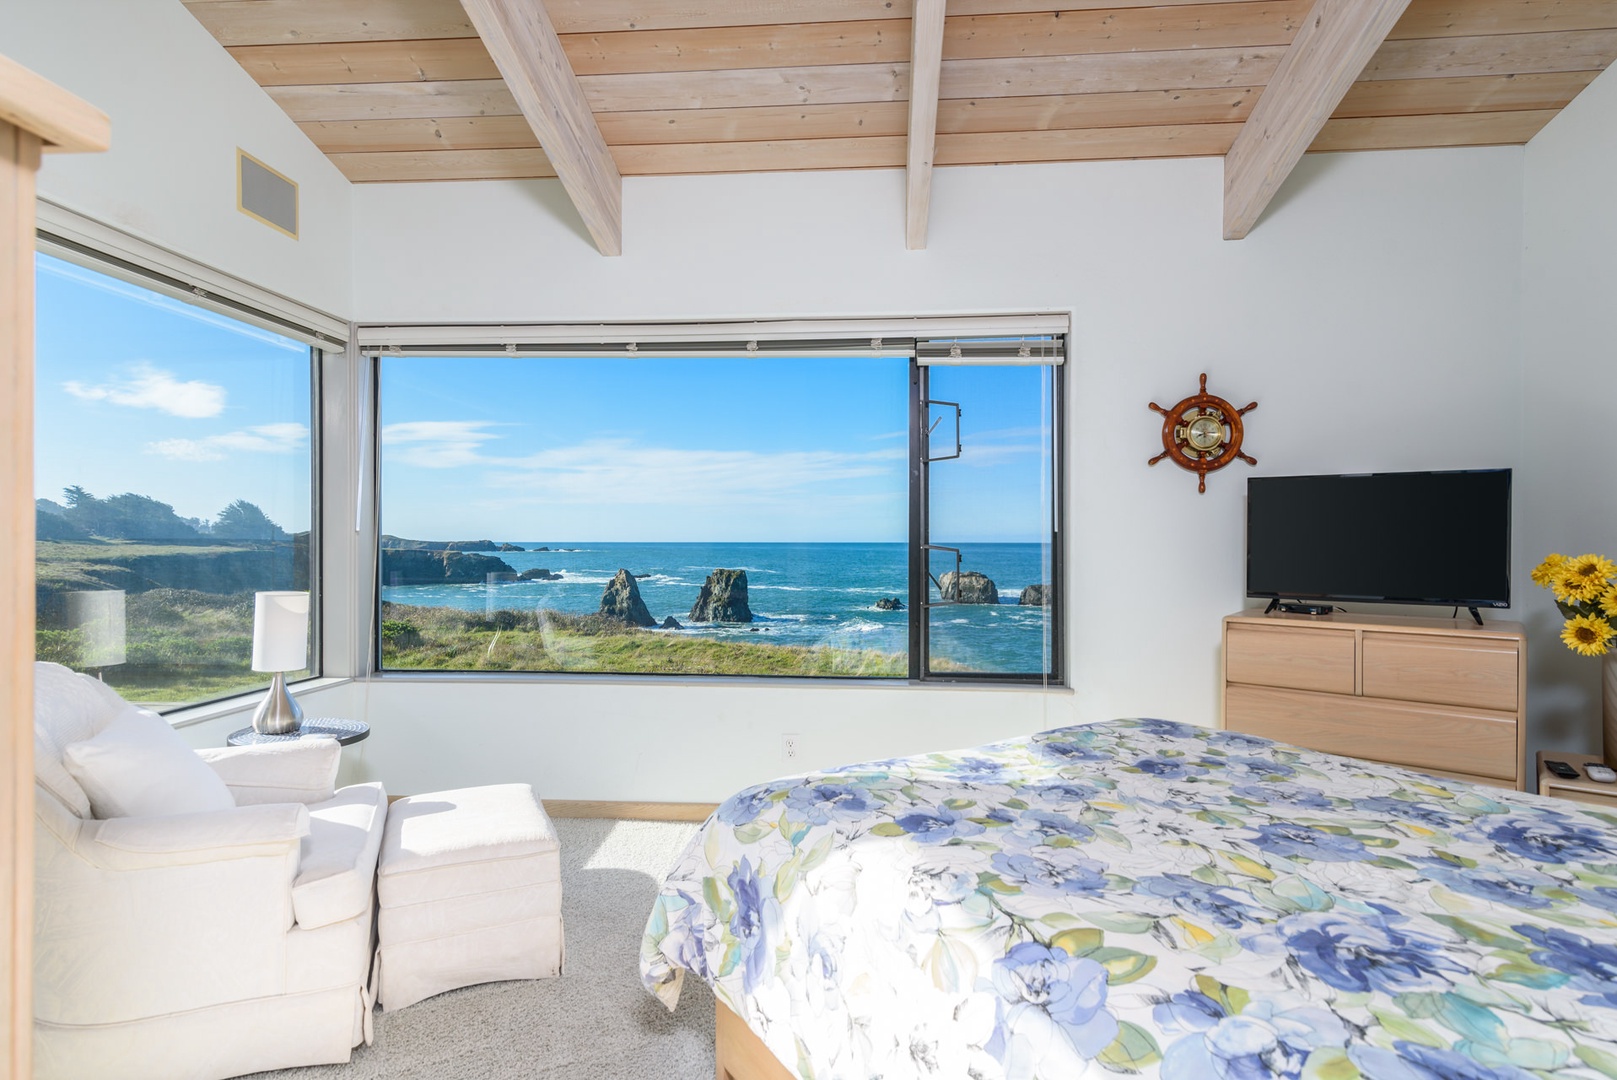 Bedroom #1 after amazing views. with a door  opening to the ocean & bluffs